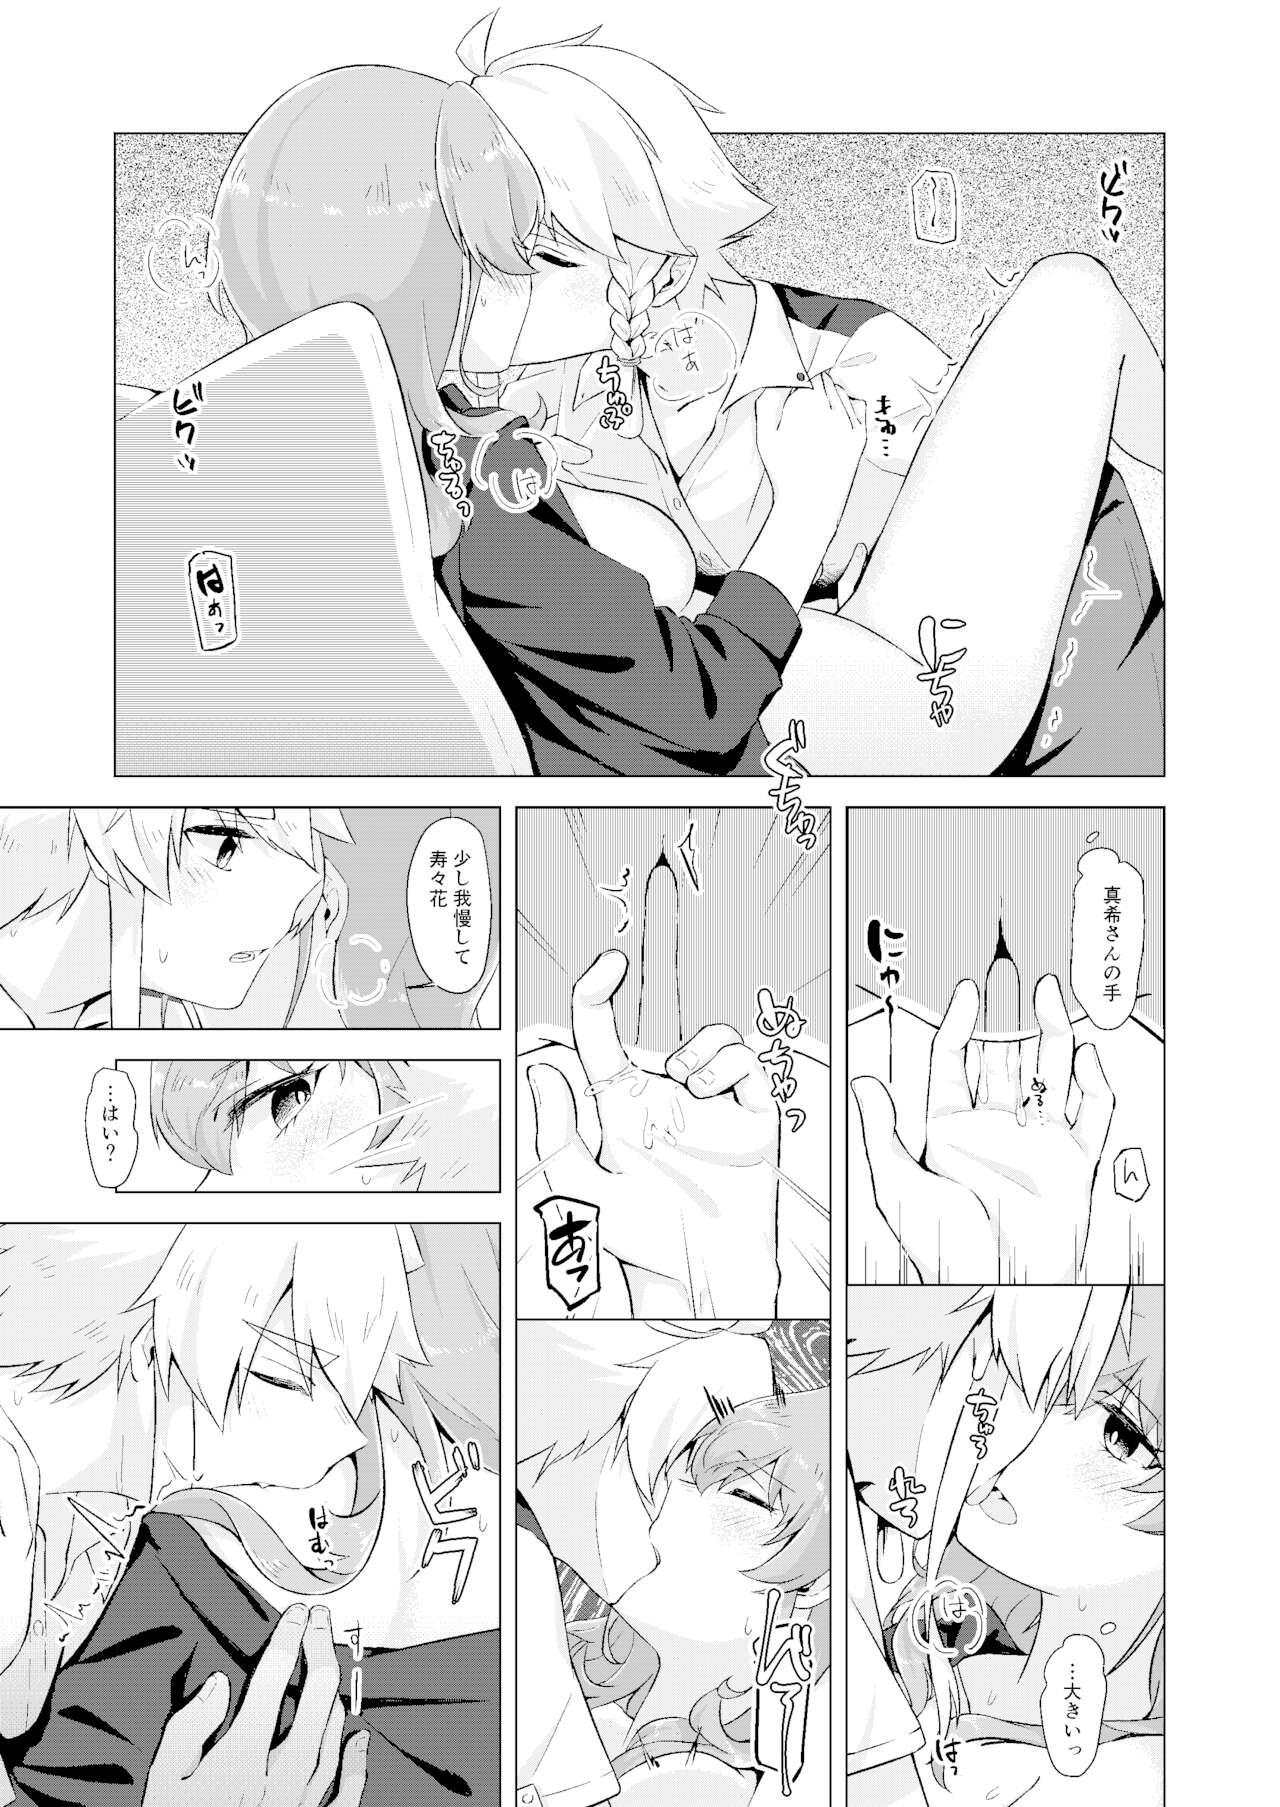 Spooning THE ELITE GUARDS' DAY OFF - Toji no miko Blond - Page 12